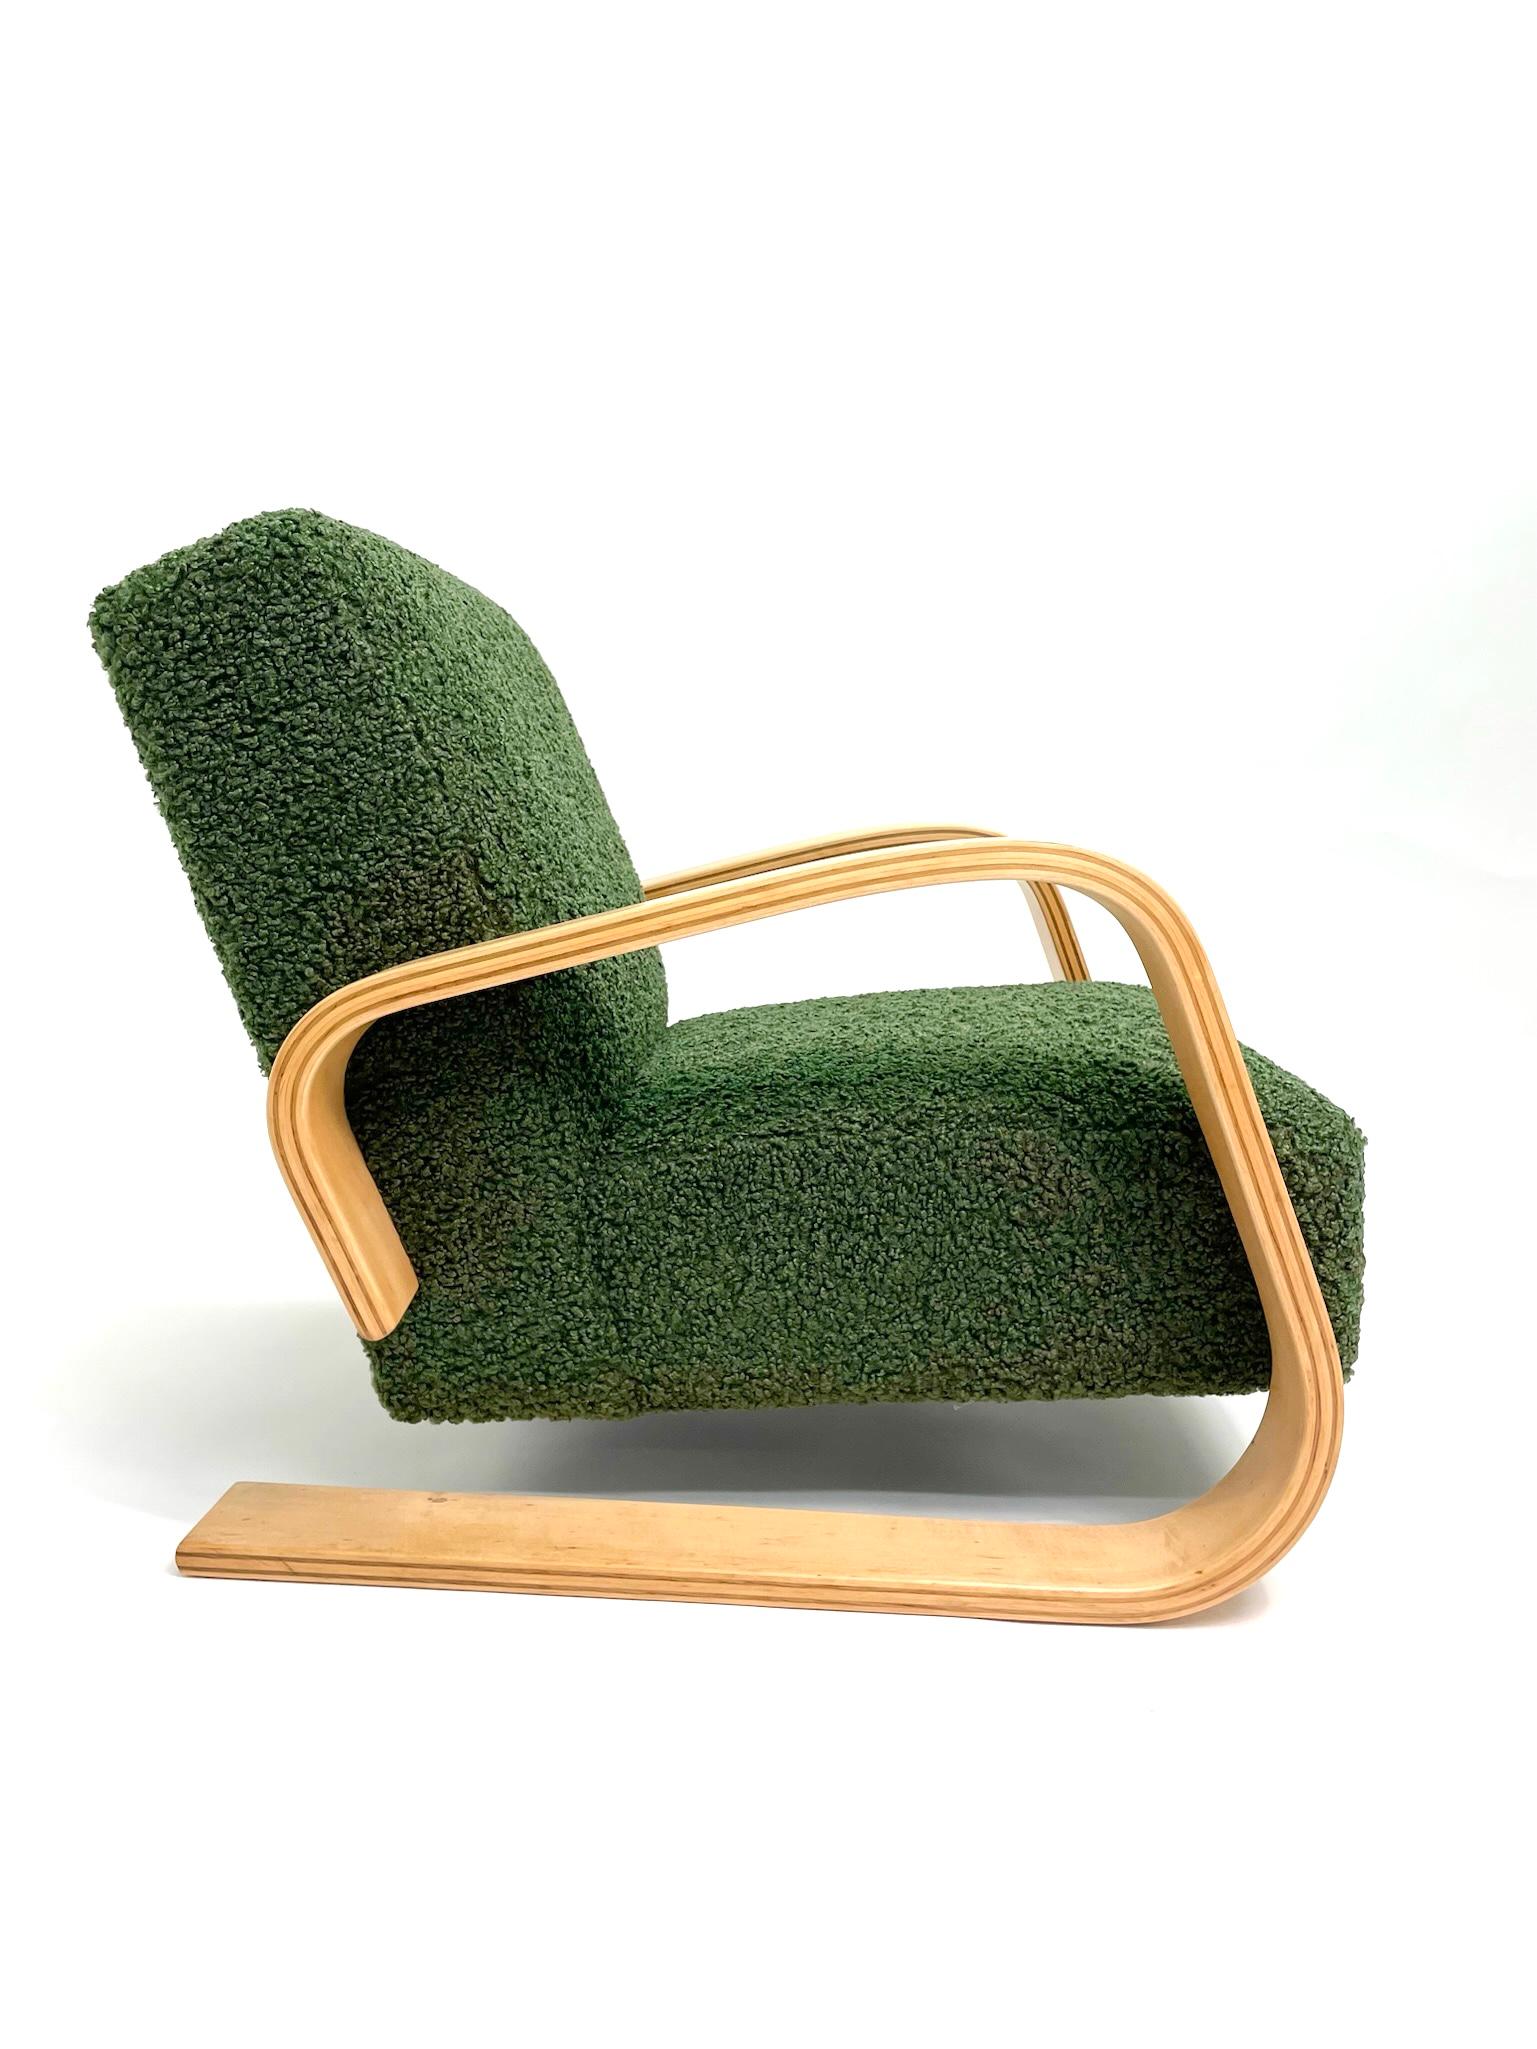 A stunning, rare and early example of an Alvar Aalto Model 400 